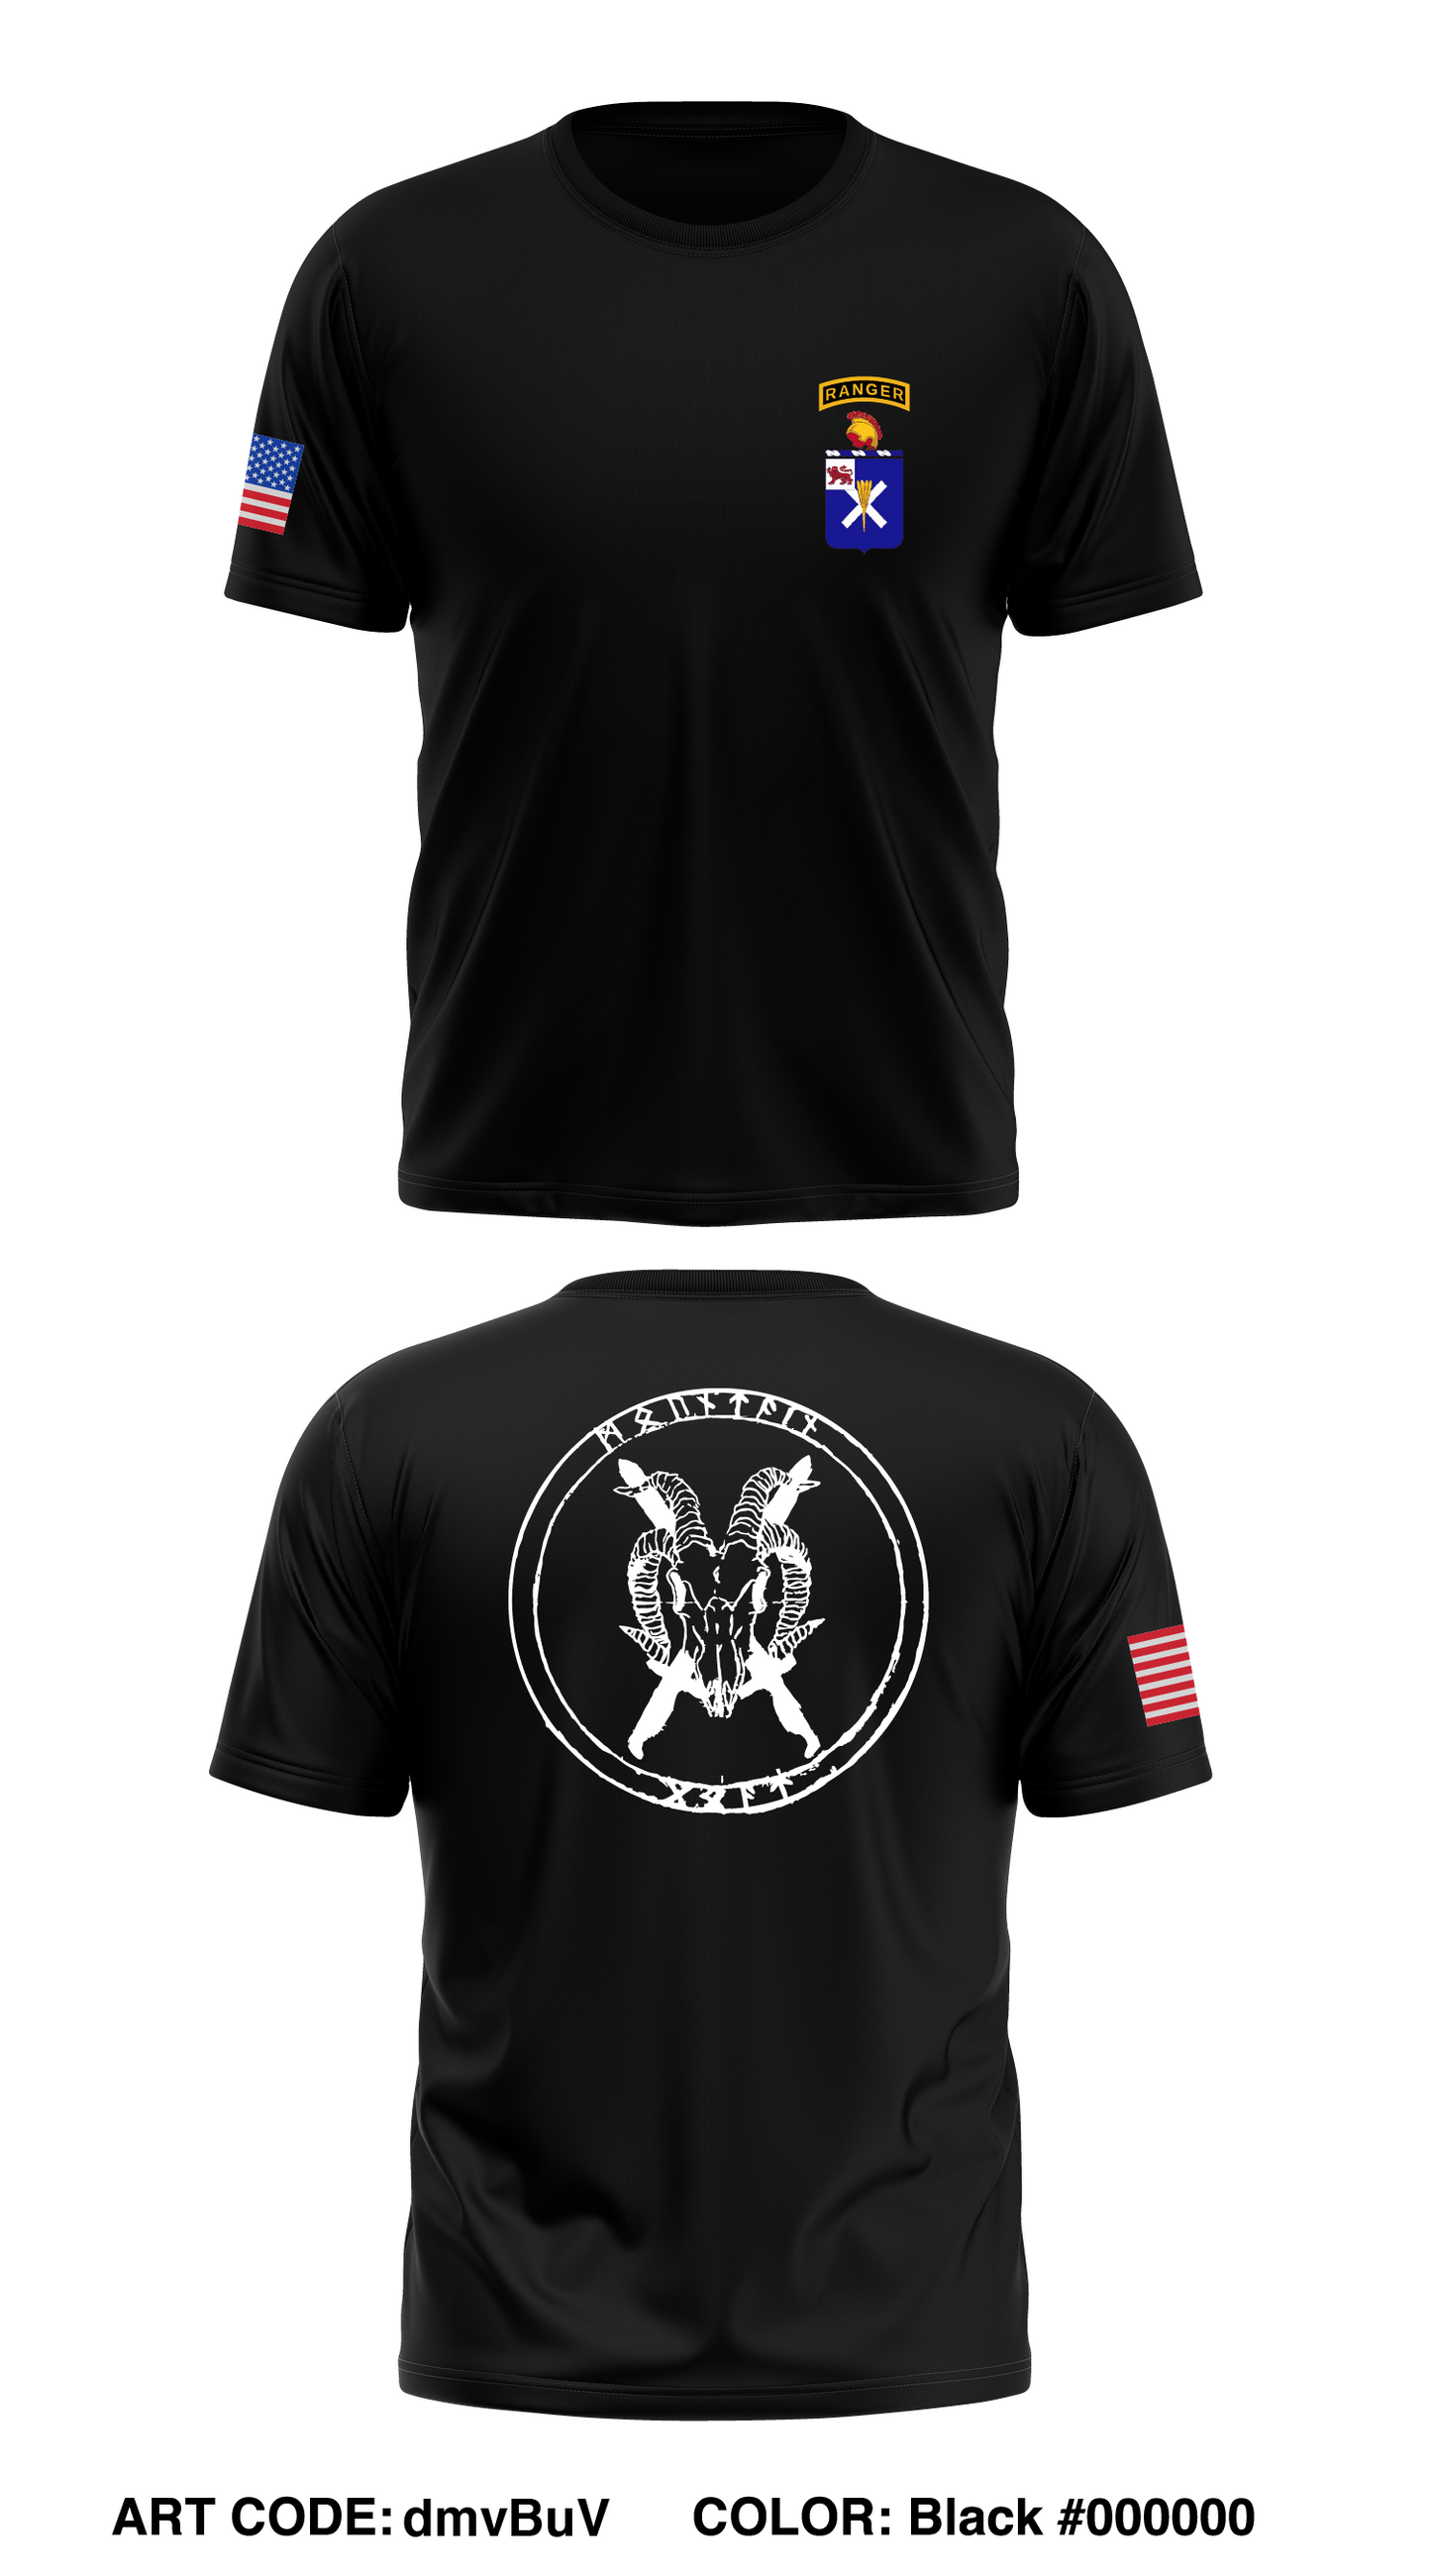 3rd Platoon, D Co, 1-32IN 10th Mountain Division  Store 1 Core Men's SS Performance Tee - dmvBuV